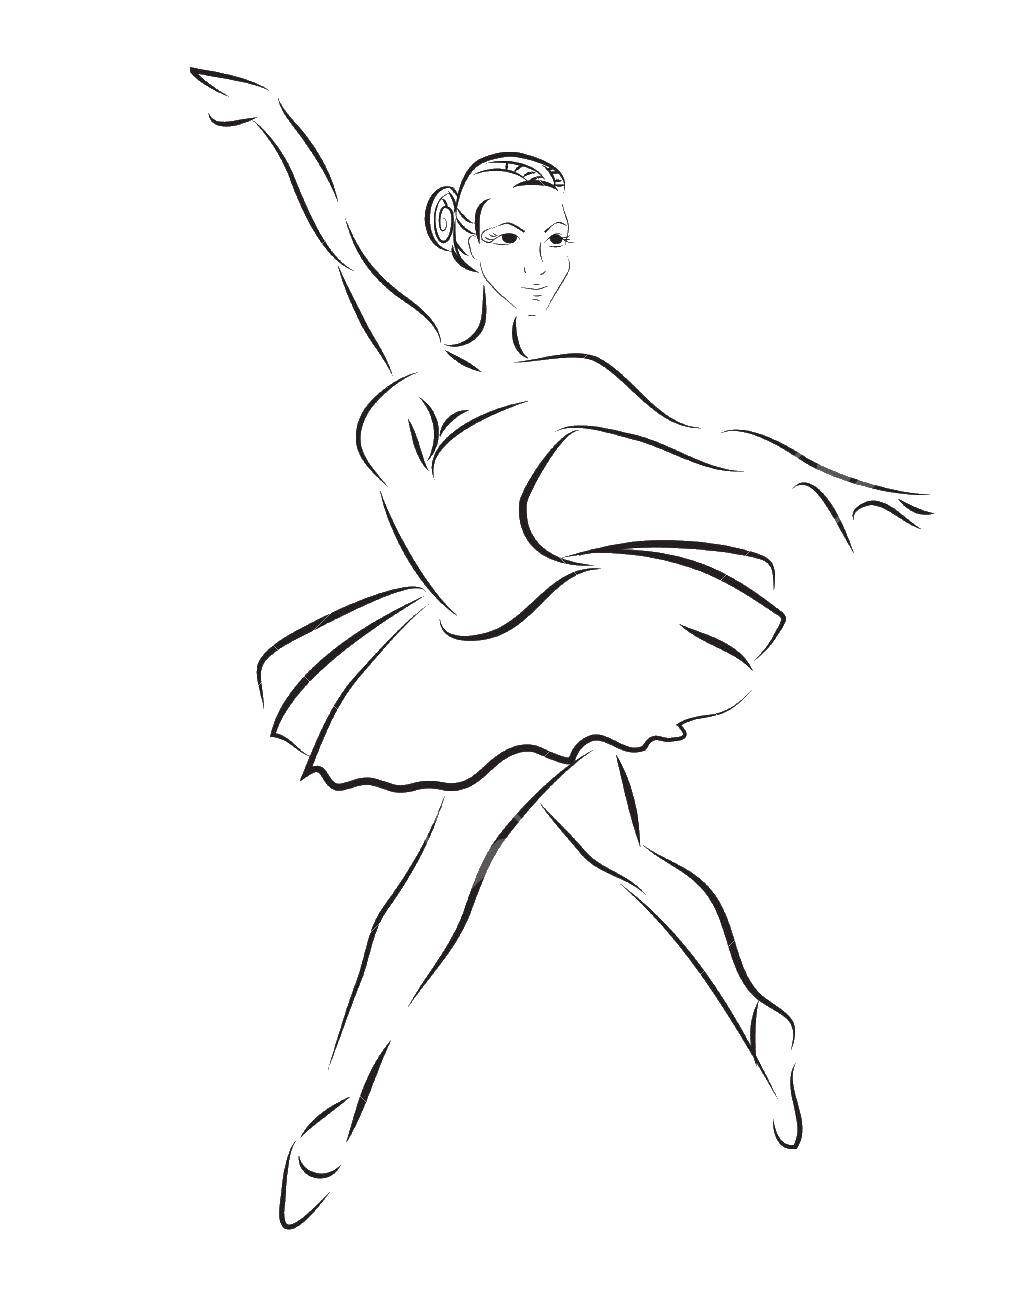 Coloring The outline of the ballerina. Category the contours of the ballerina to cut. Tags:  contour , ballerina, tutu.